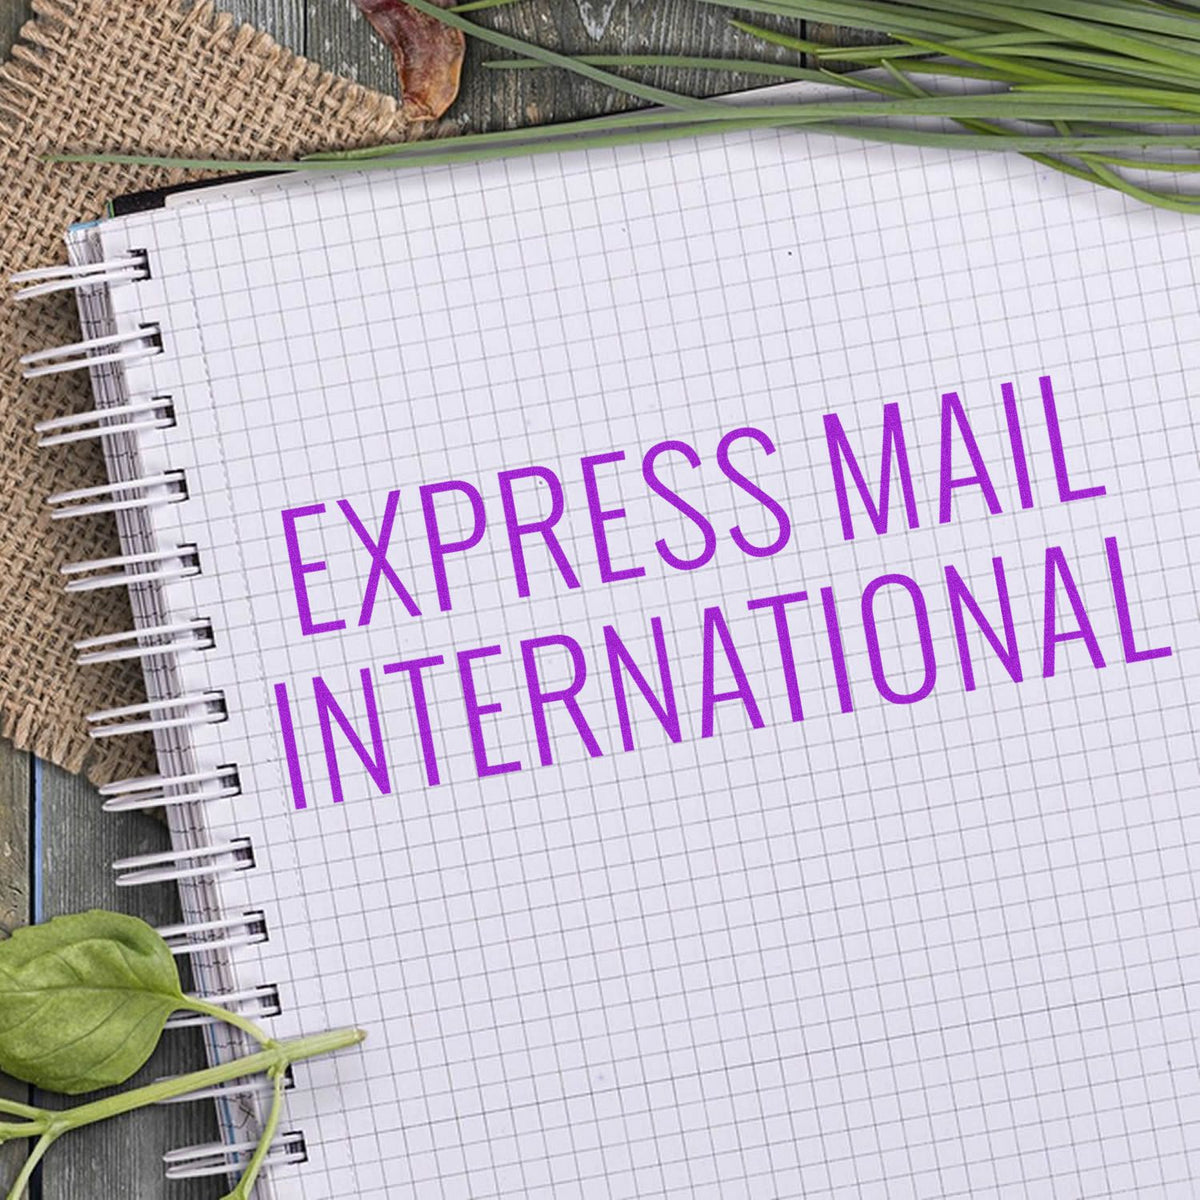 Express Mail International Rubber Stamp In Use